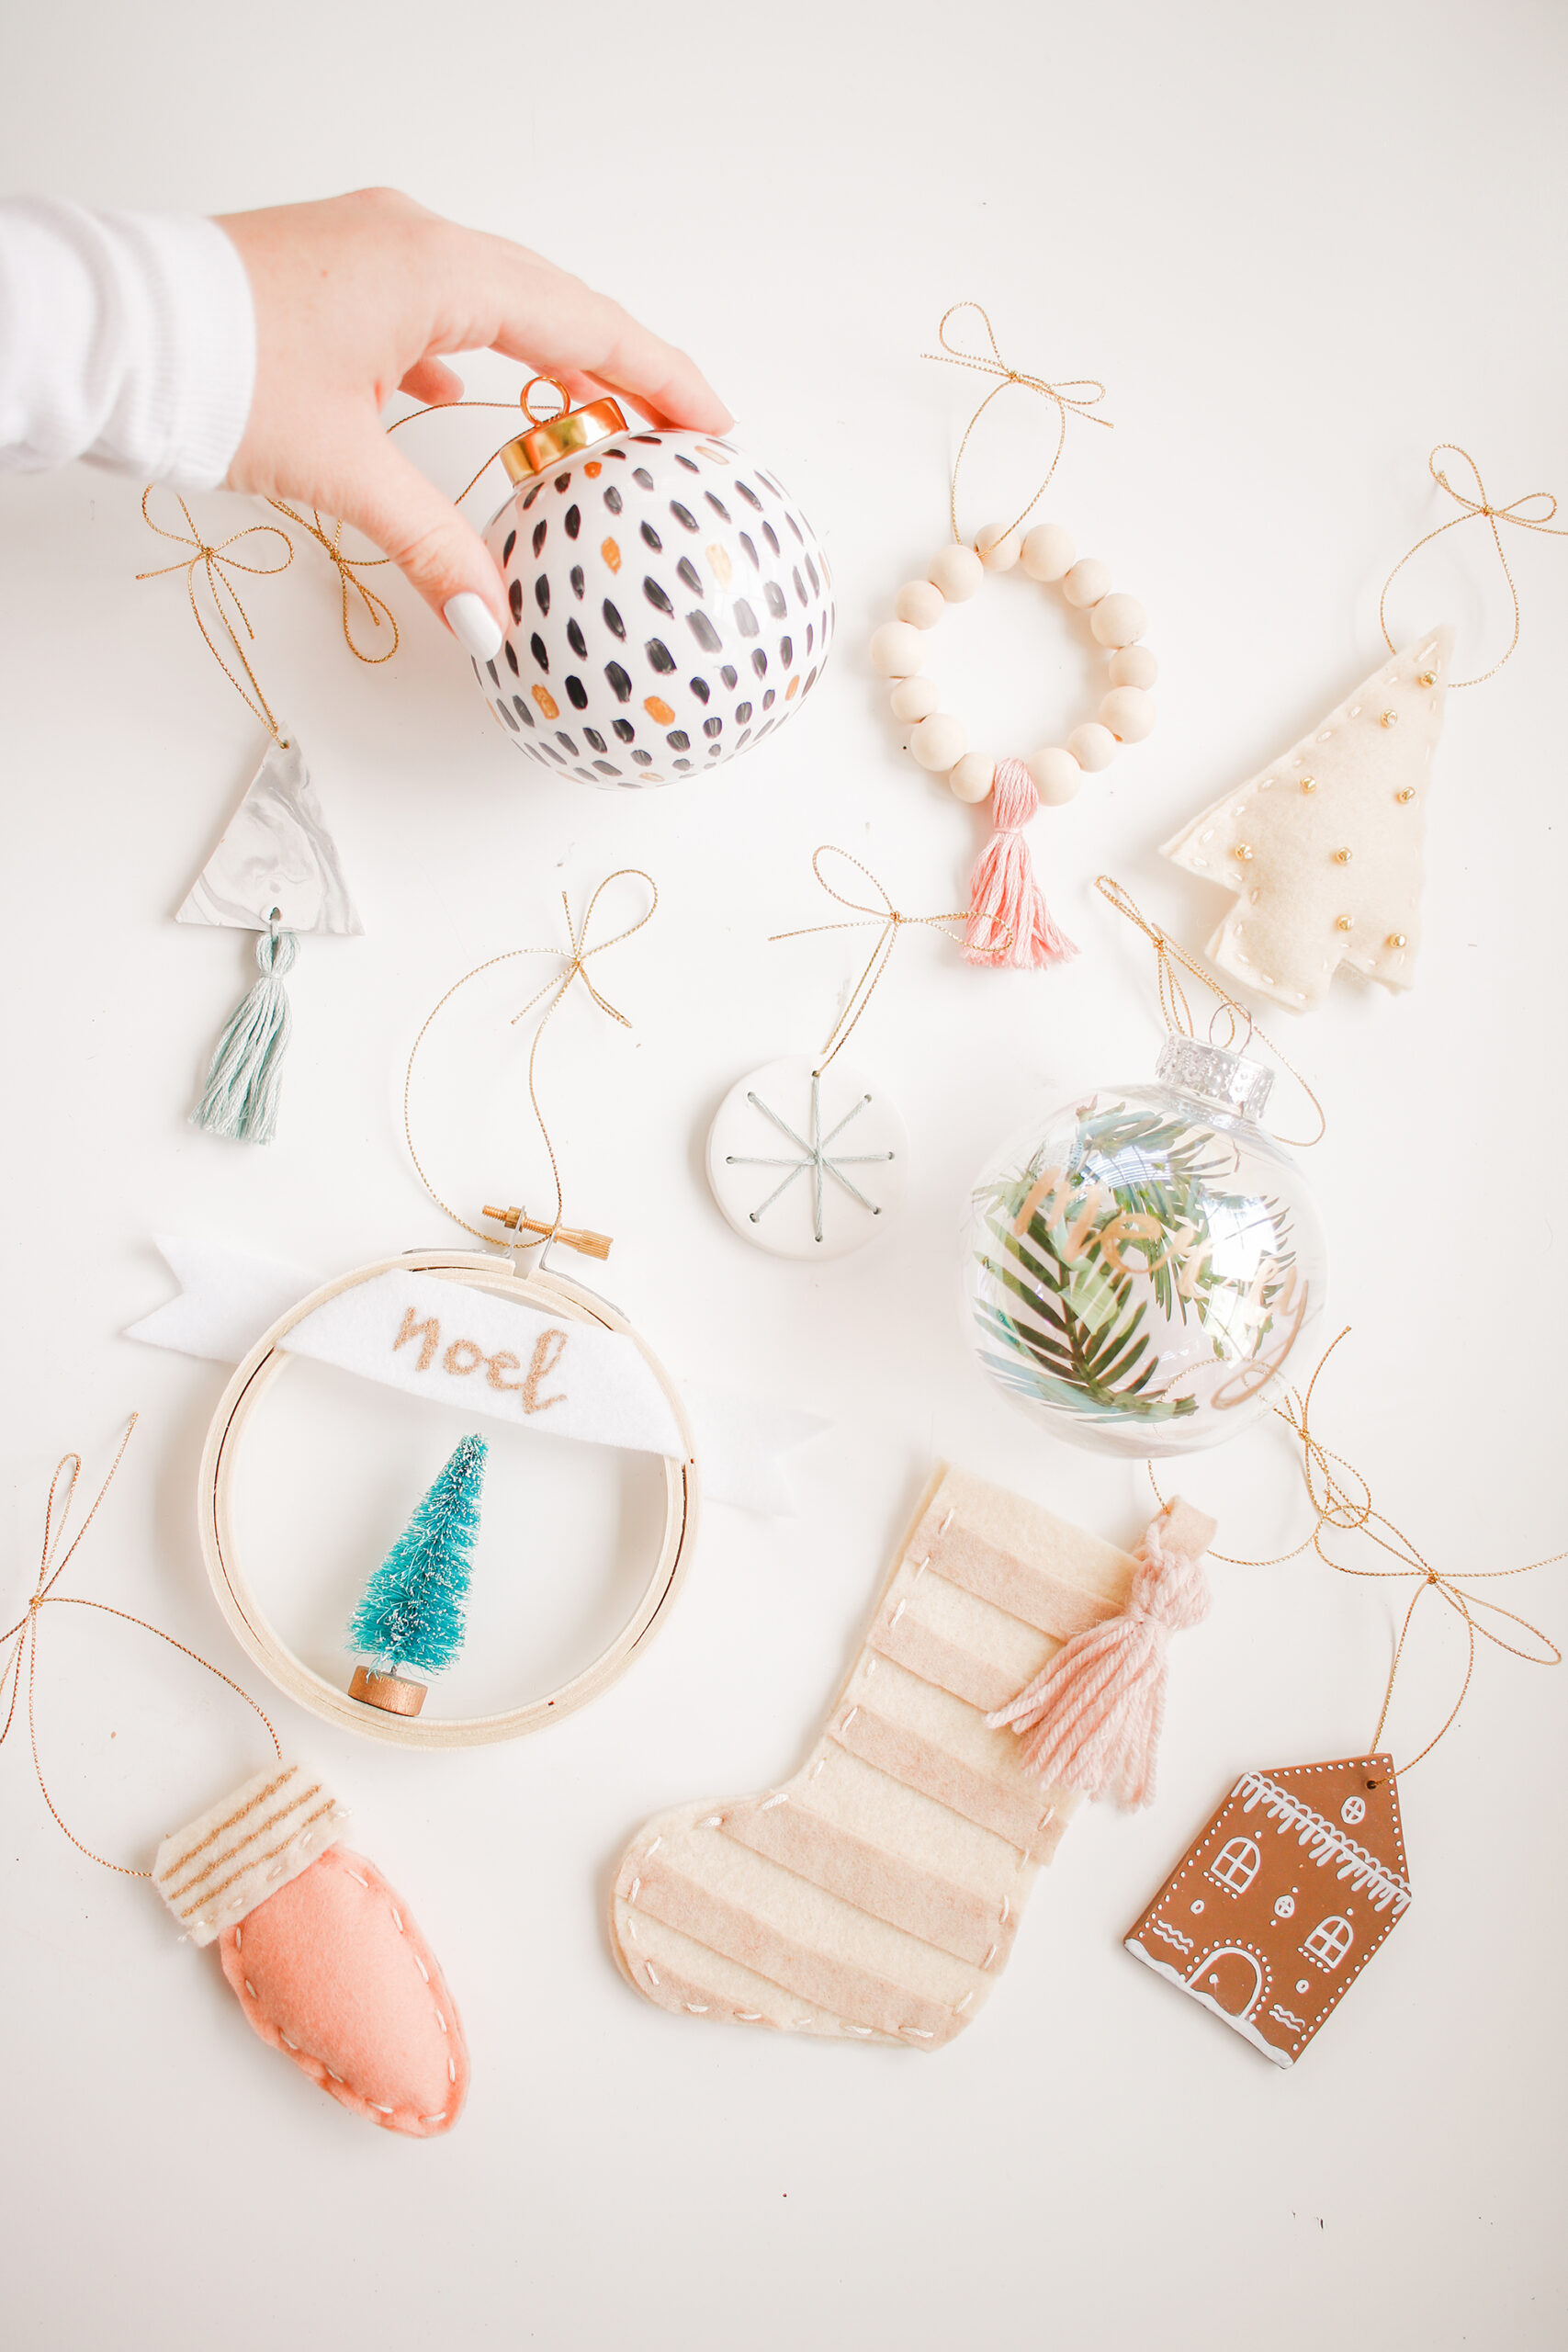 10 DIY Christmas Ornaments that are modern and minimal!